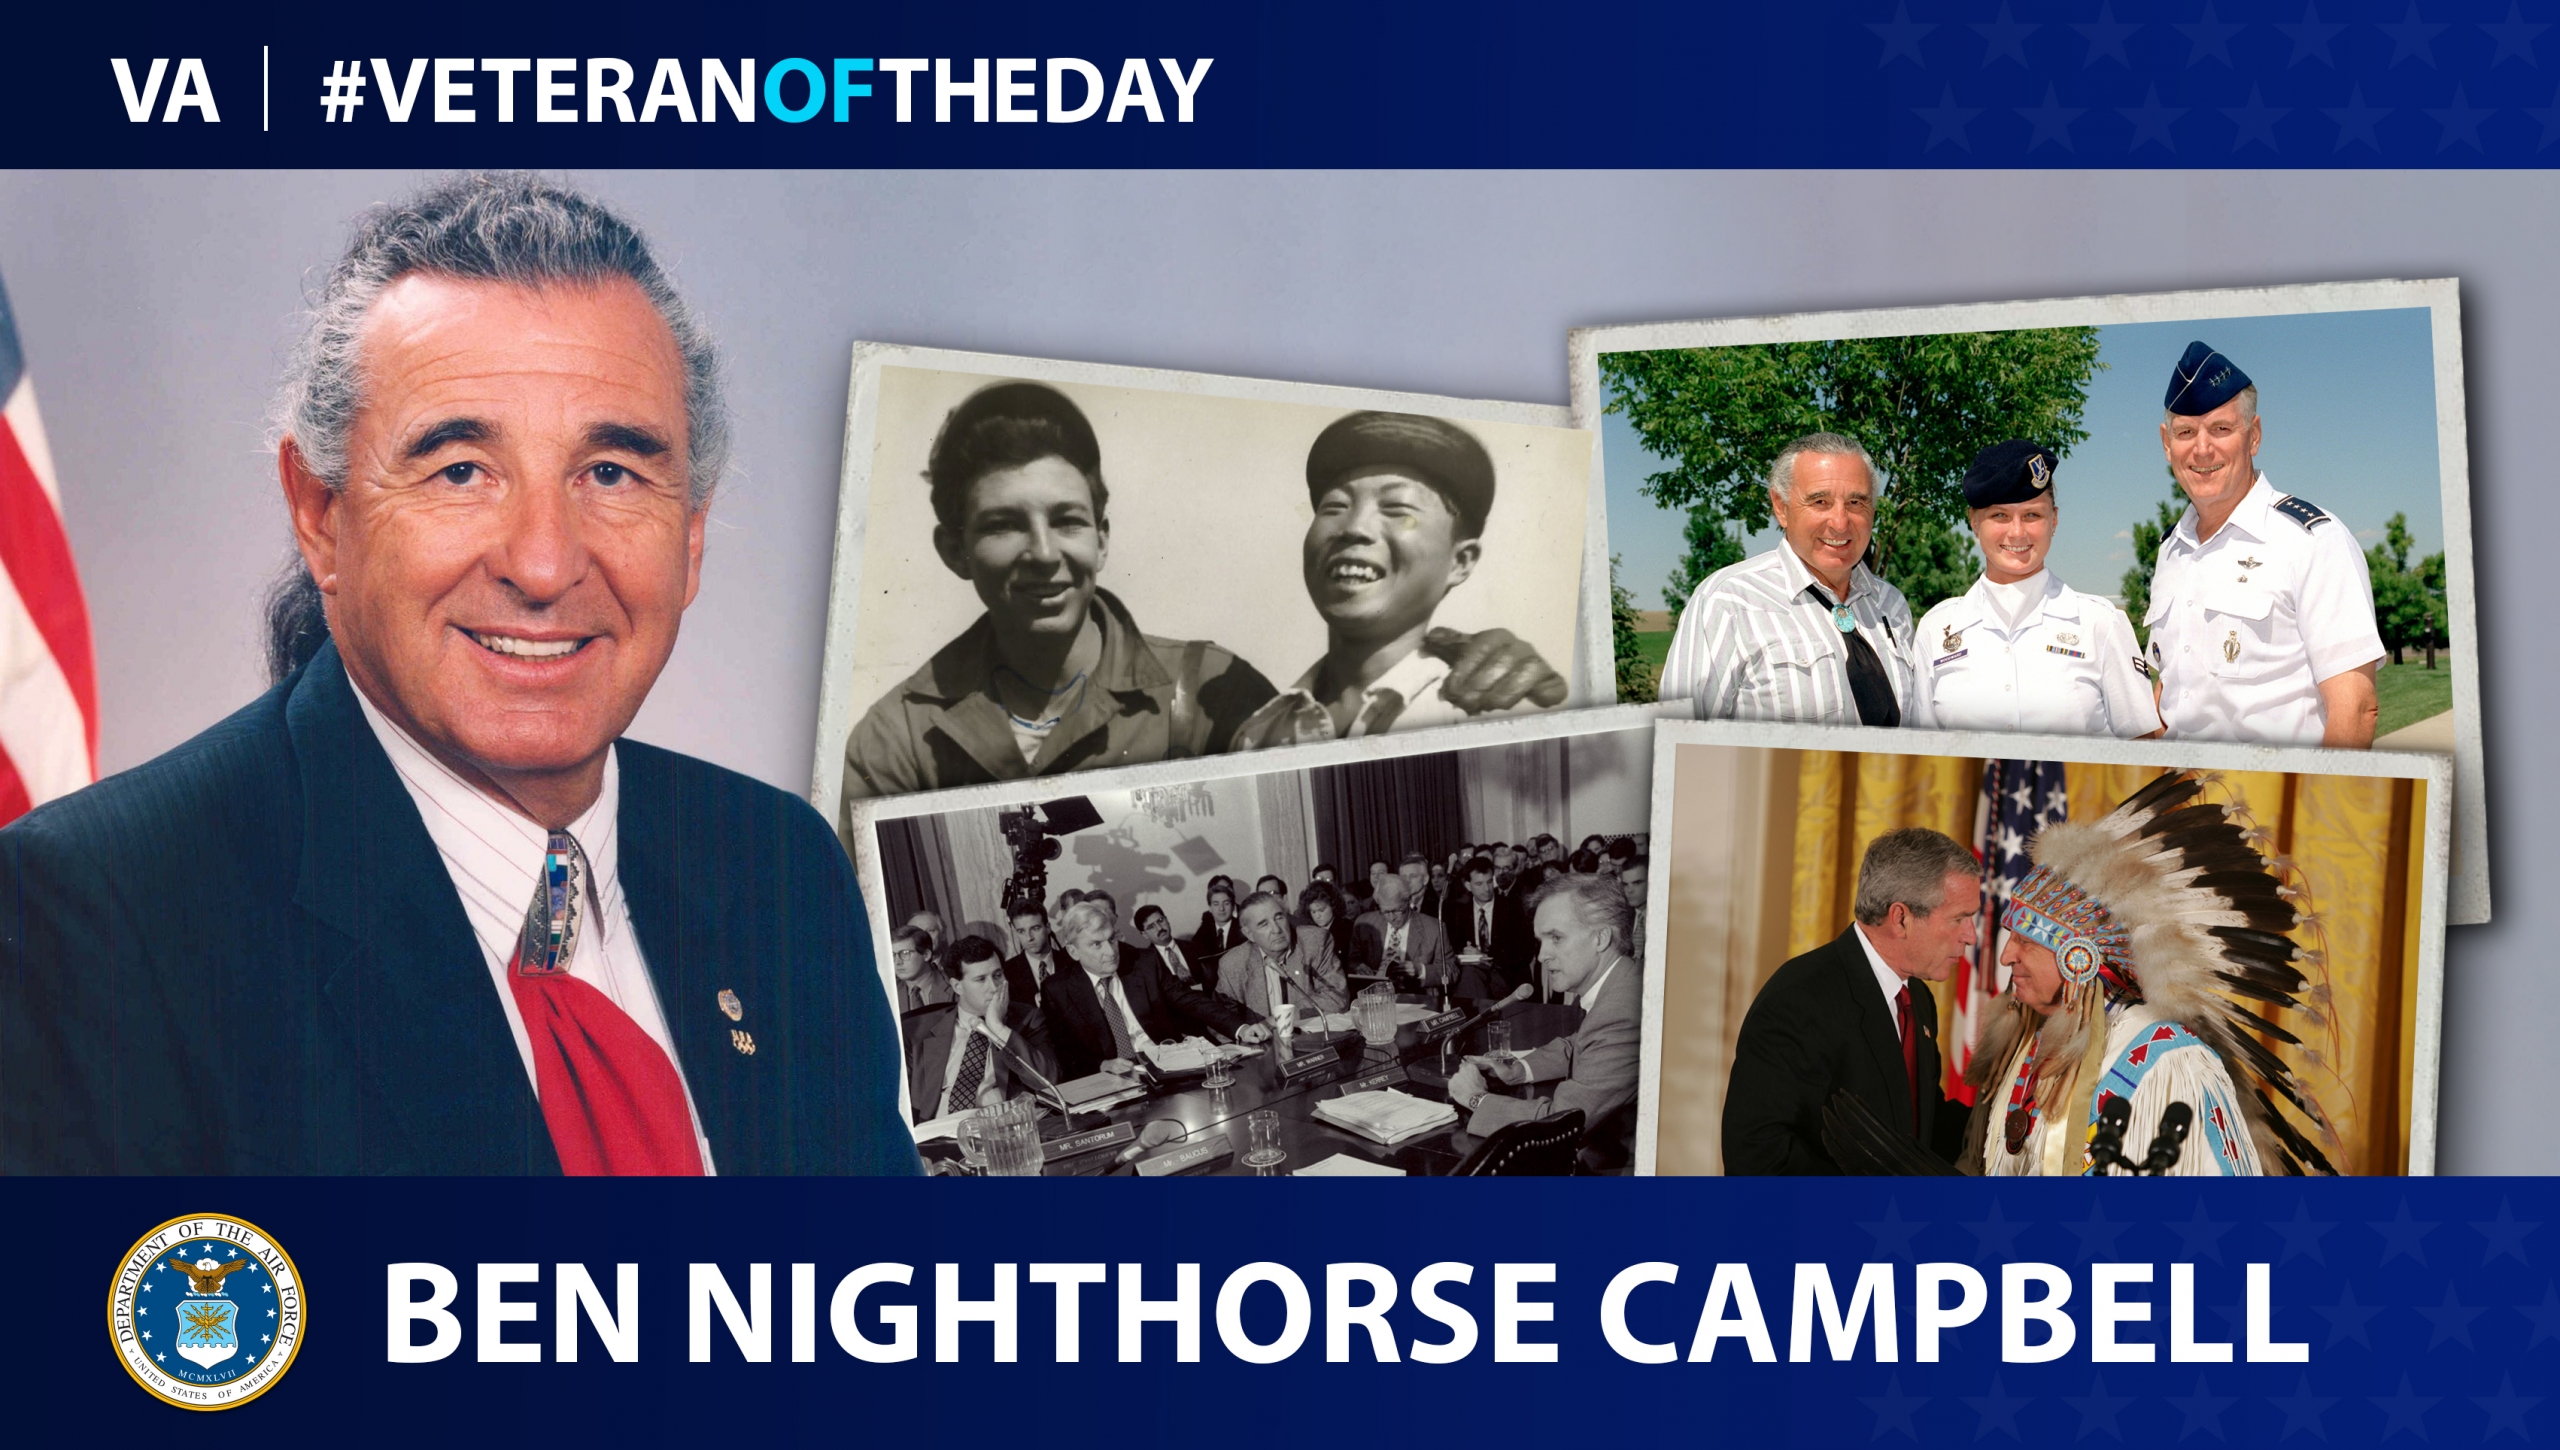 During Native American Heritage Month, today’s #VeteranOfTheDay is Air Force Veteran Ben Nighthorse Campbell, who later became a U.S. senator.